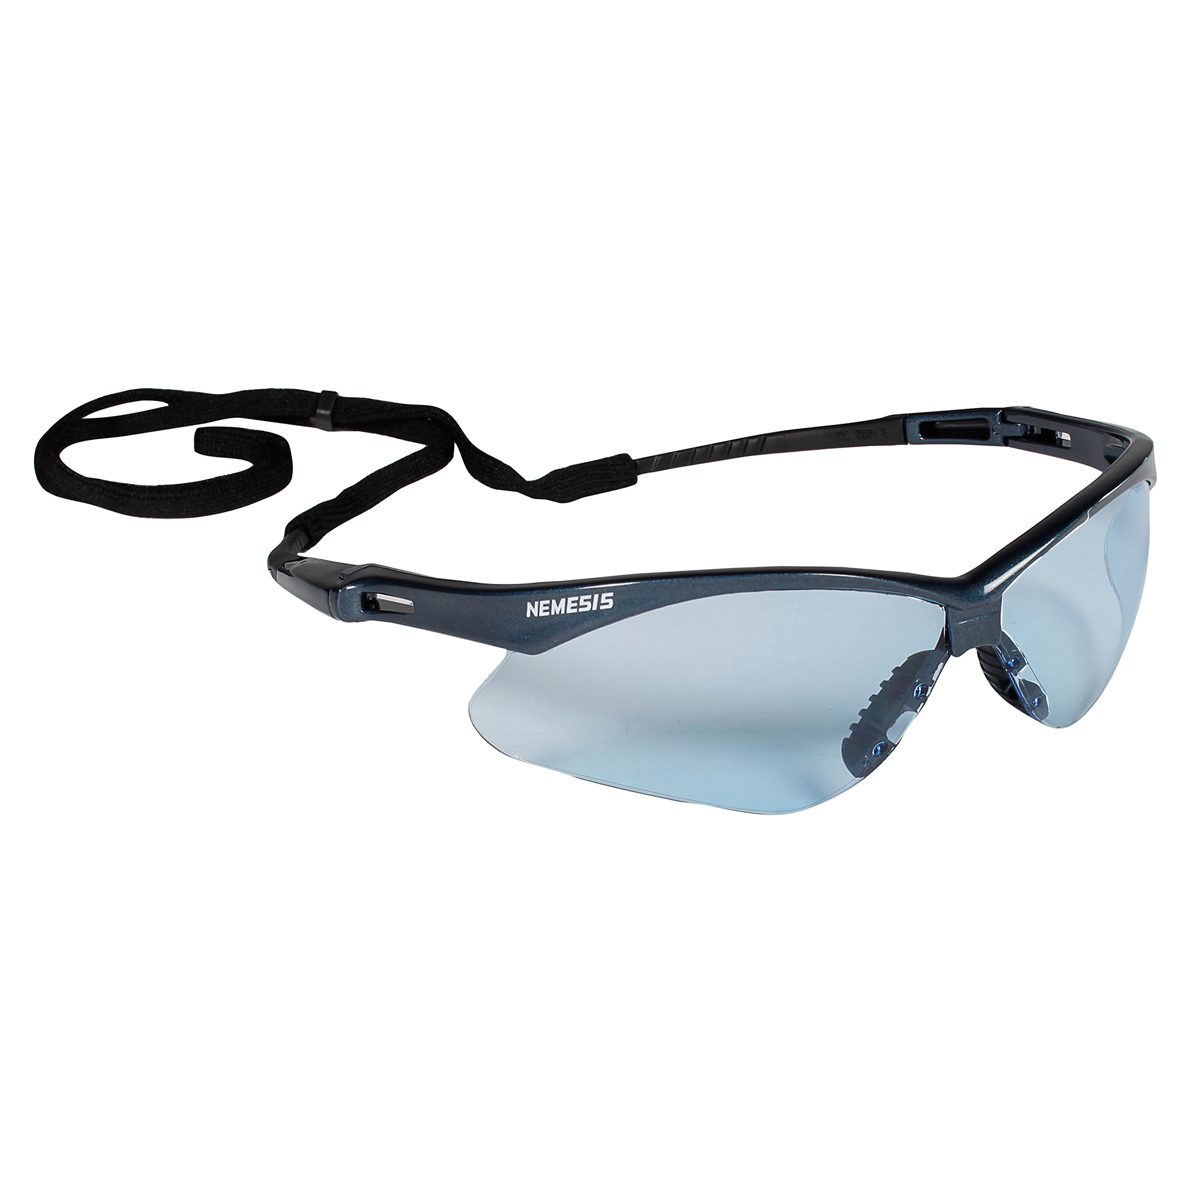 Kimberly-Clark Professional* KleenGuard™ Nemesis* Blue Safety Glasses With Blue Hard Coat Lens (Availability restrictions apply.